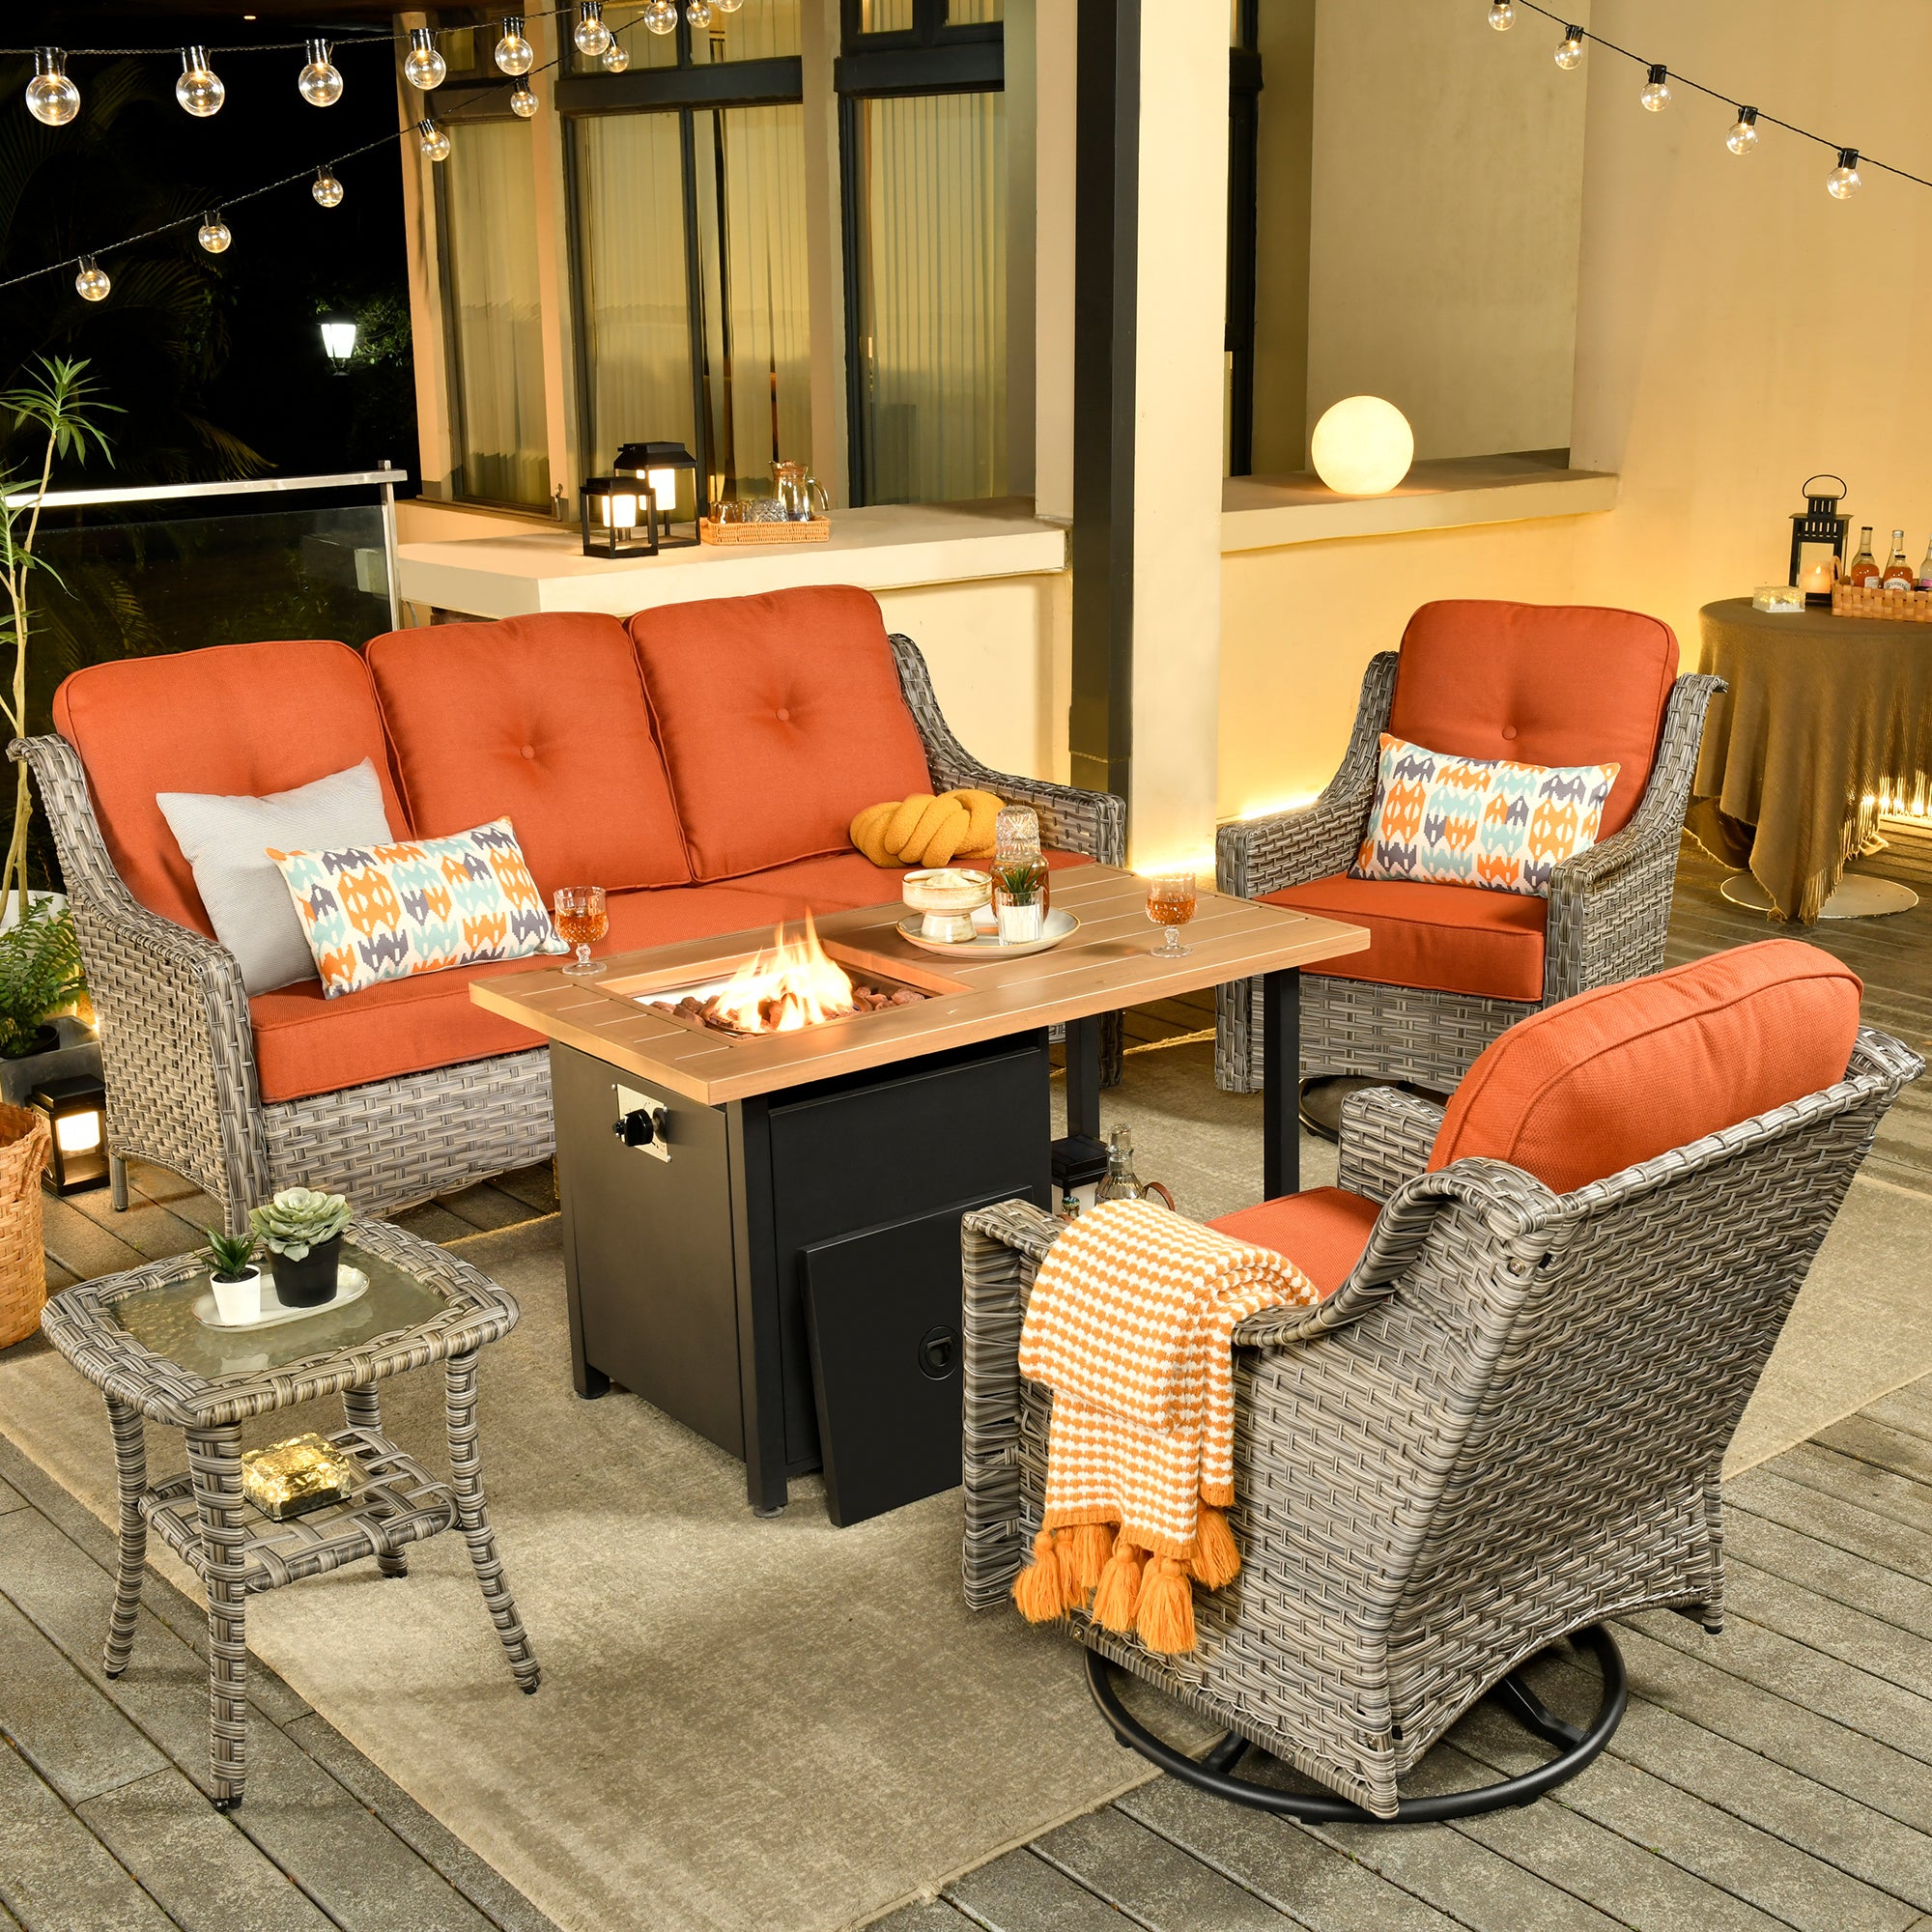 Ovios Conversation Set 5-Piece PAD Series include Rocking Chair & 47"Fire Pit Table